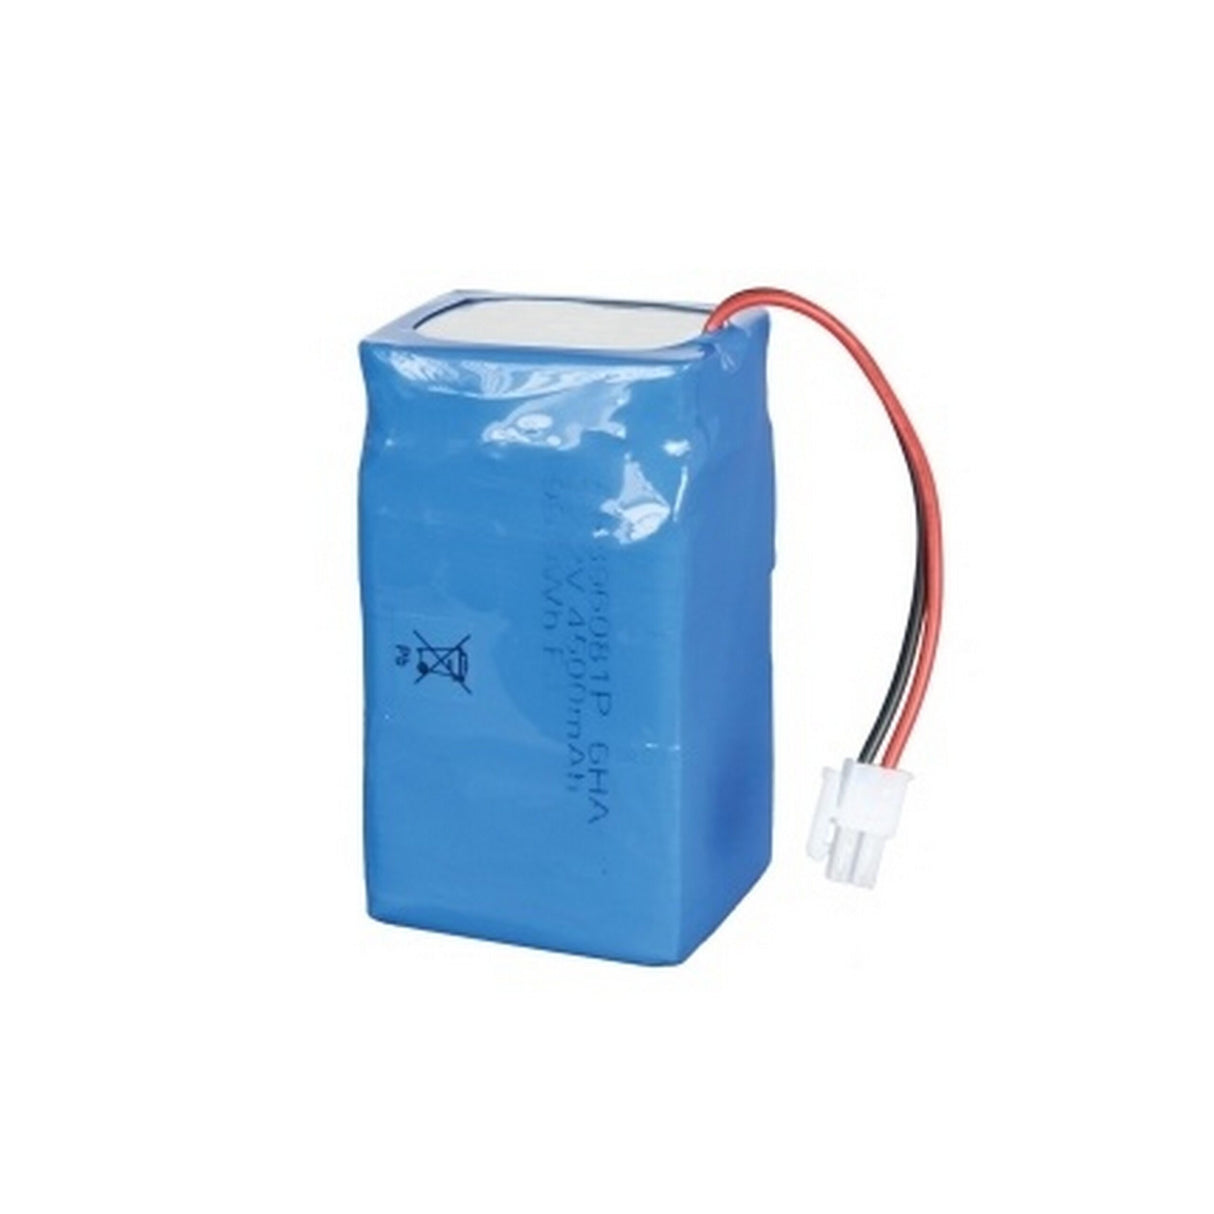 MIPRO MB-35 Rechargeable Lithium Battery for MA-505